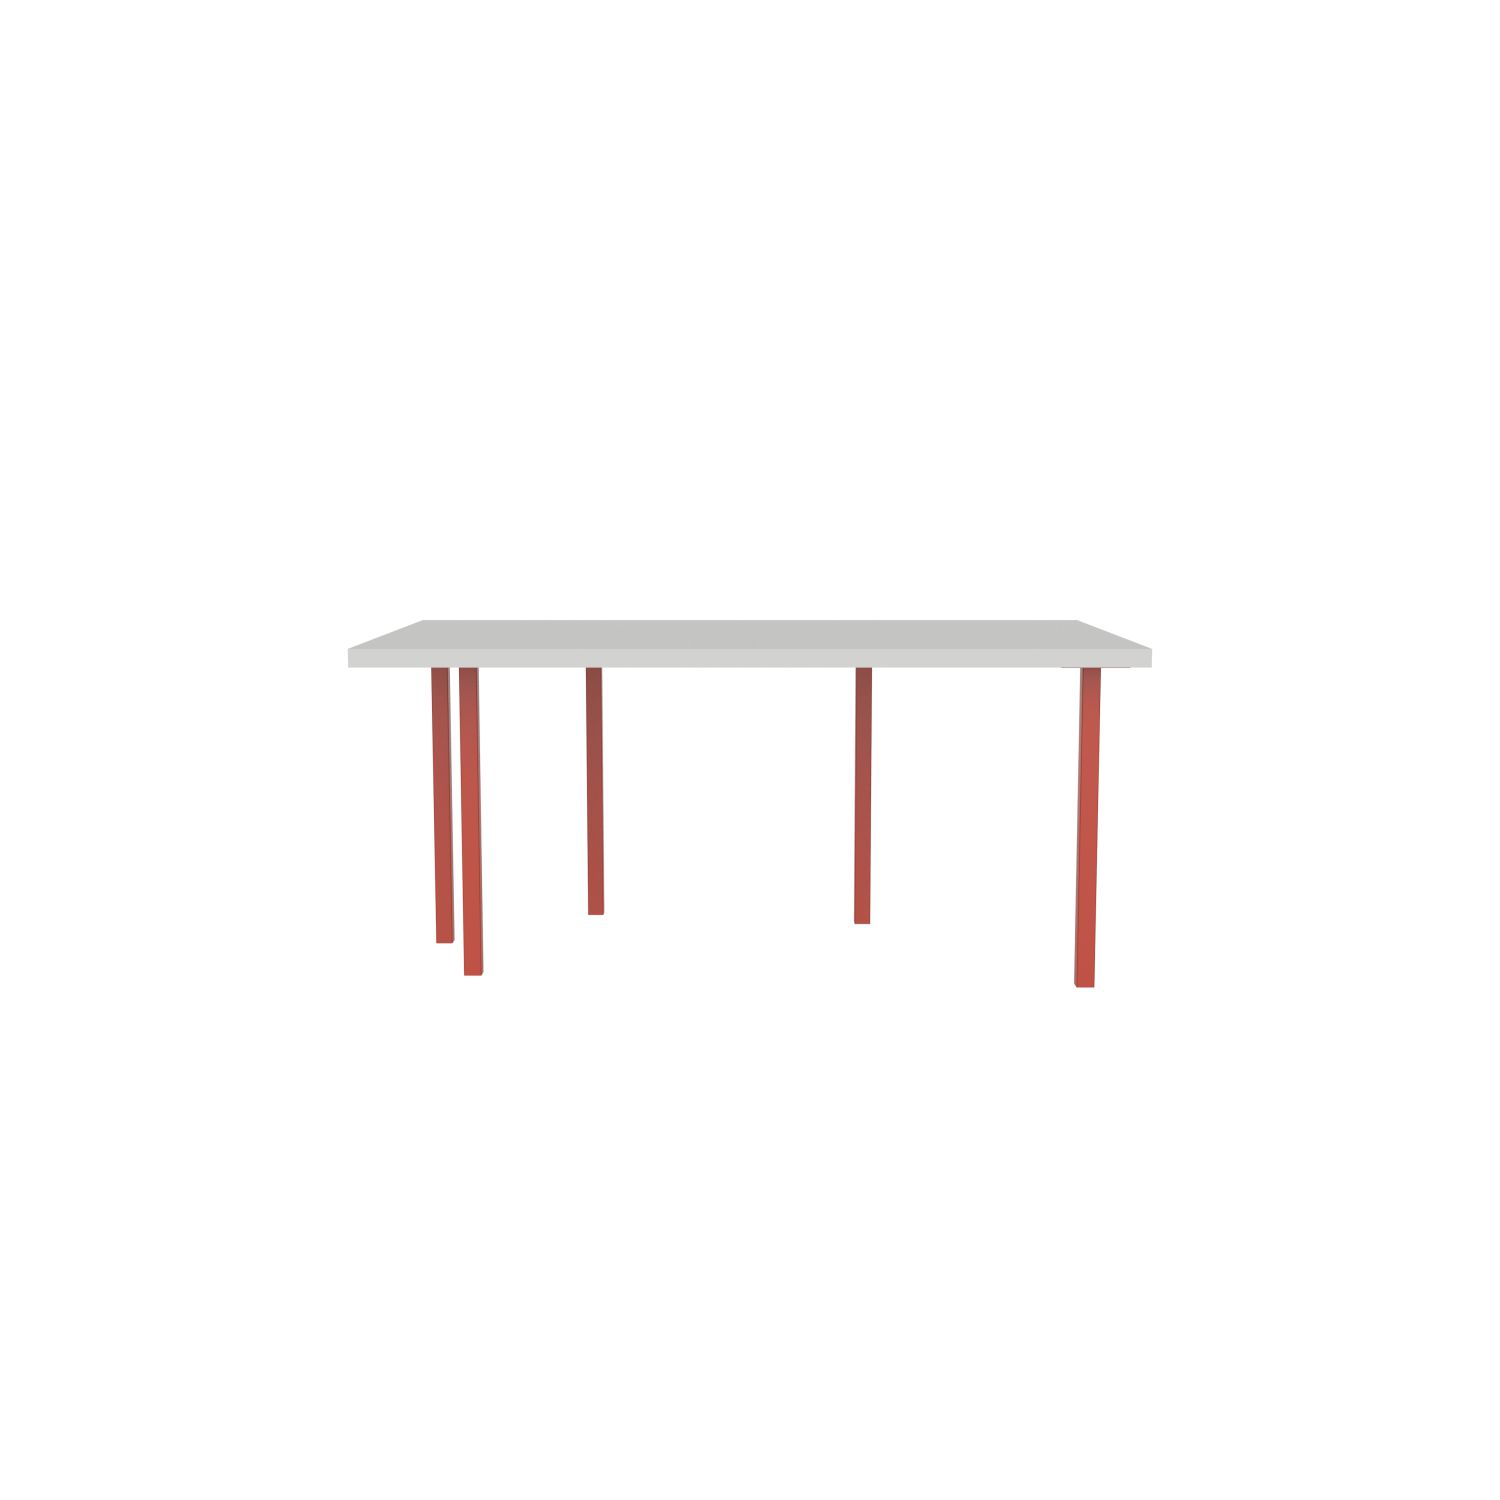 lensvelt bbrand table five fixed heigt 103x172 hpl boring grey 50 mm price level 1 vermilion red ral2002